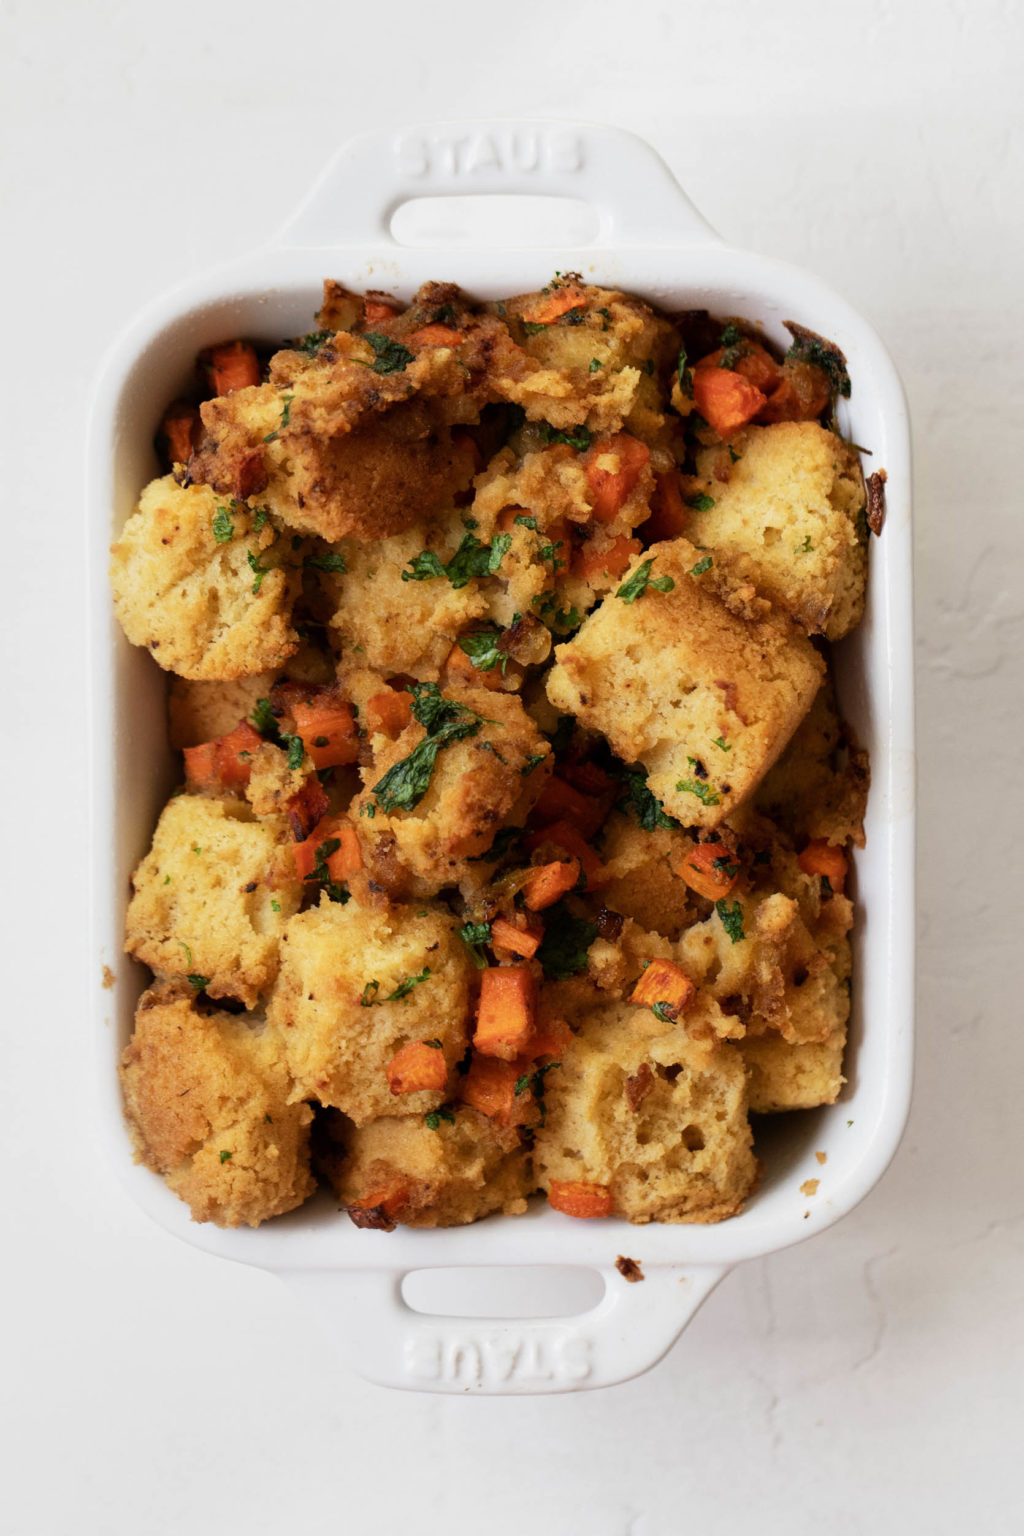 A small baking dish, filled with cornbread and vegetables.